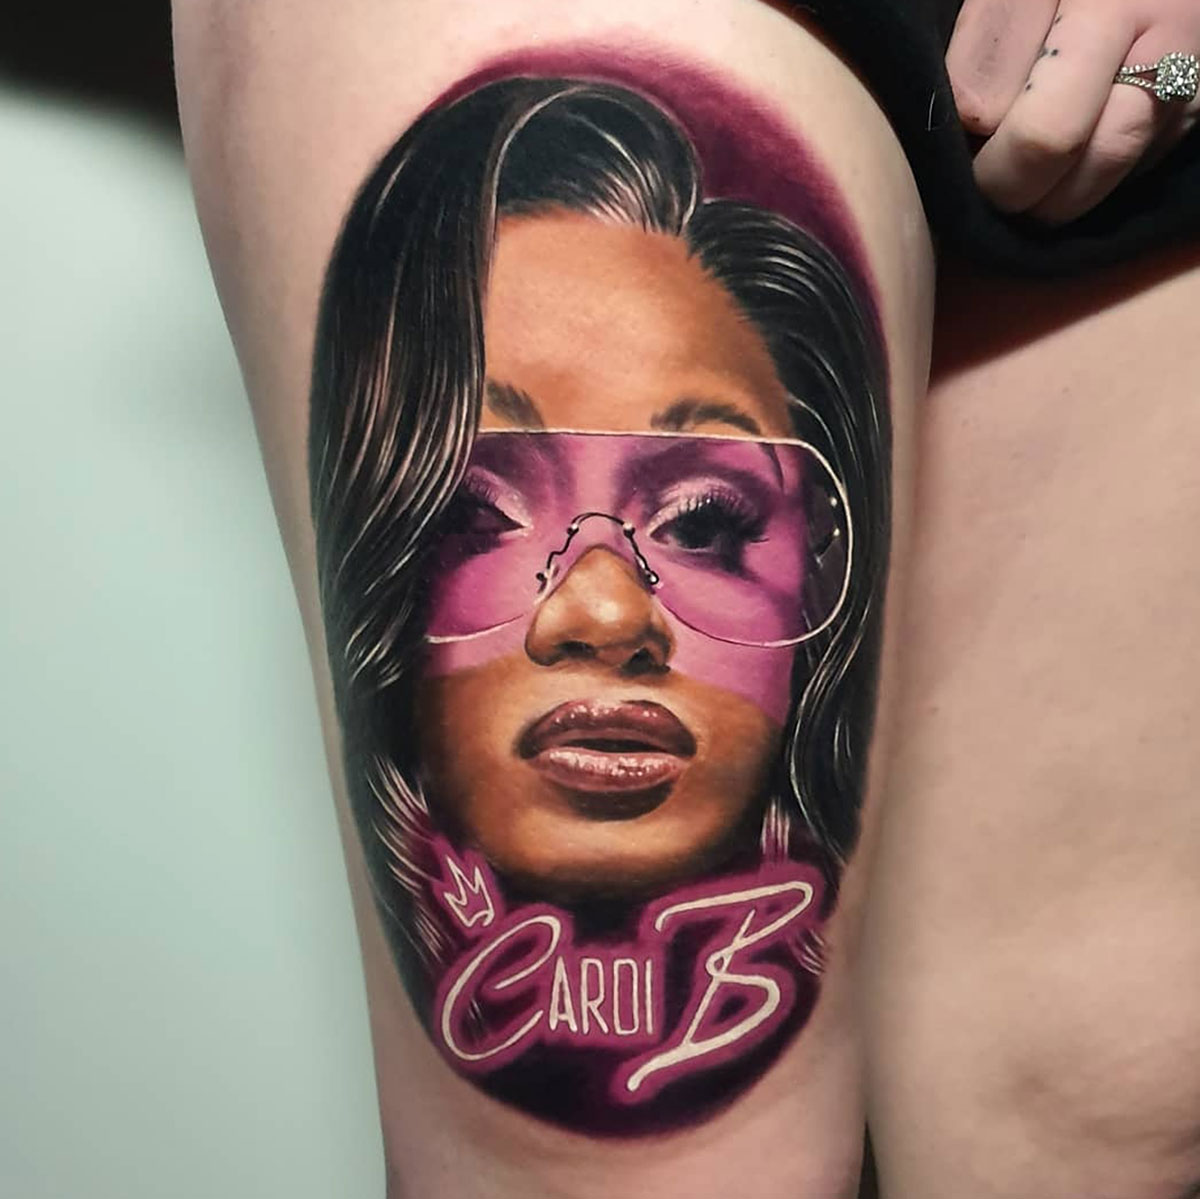 Celebrate Cardi Bs 27th Birthday with a Tour of Her Tattoos